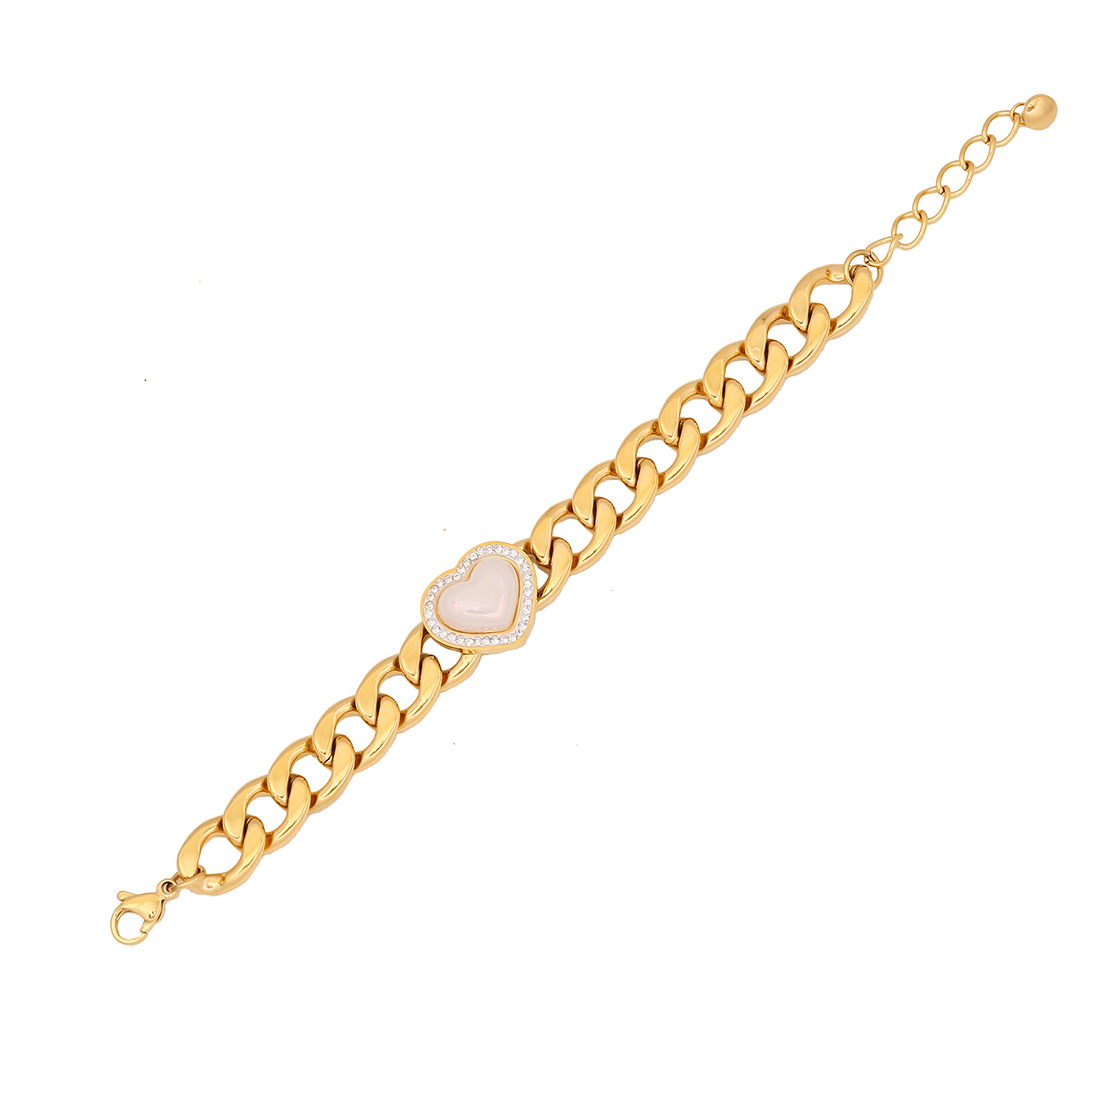 6:6 bracelet 6.3 inch with 1.6inch extender chain